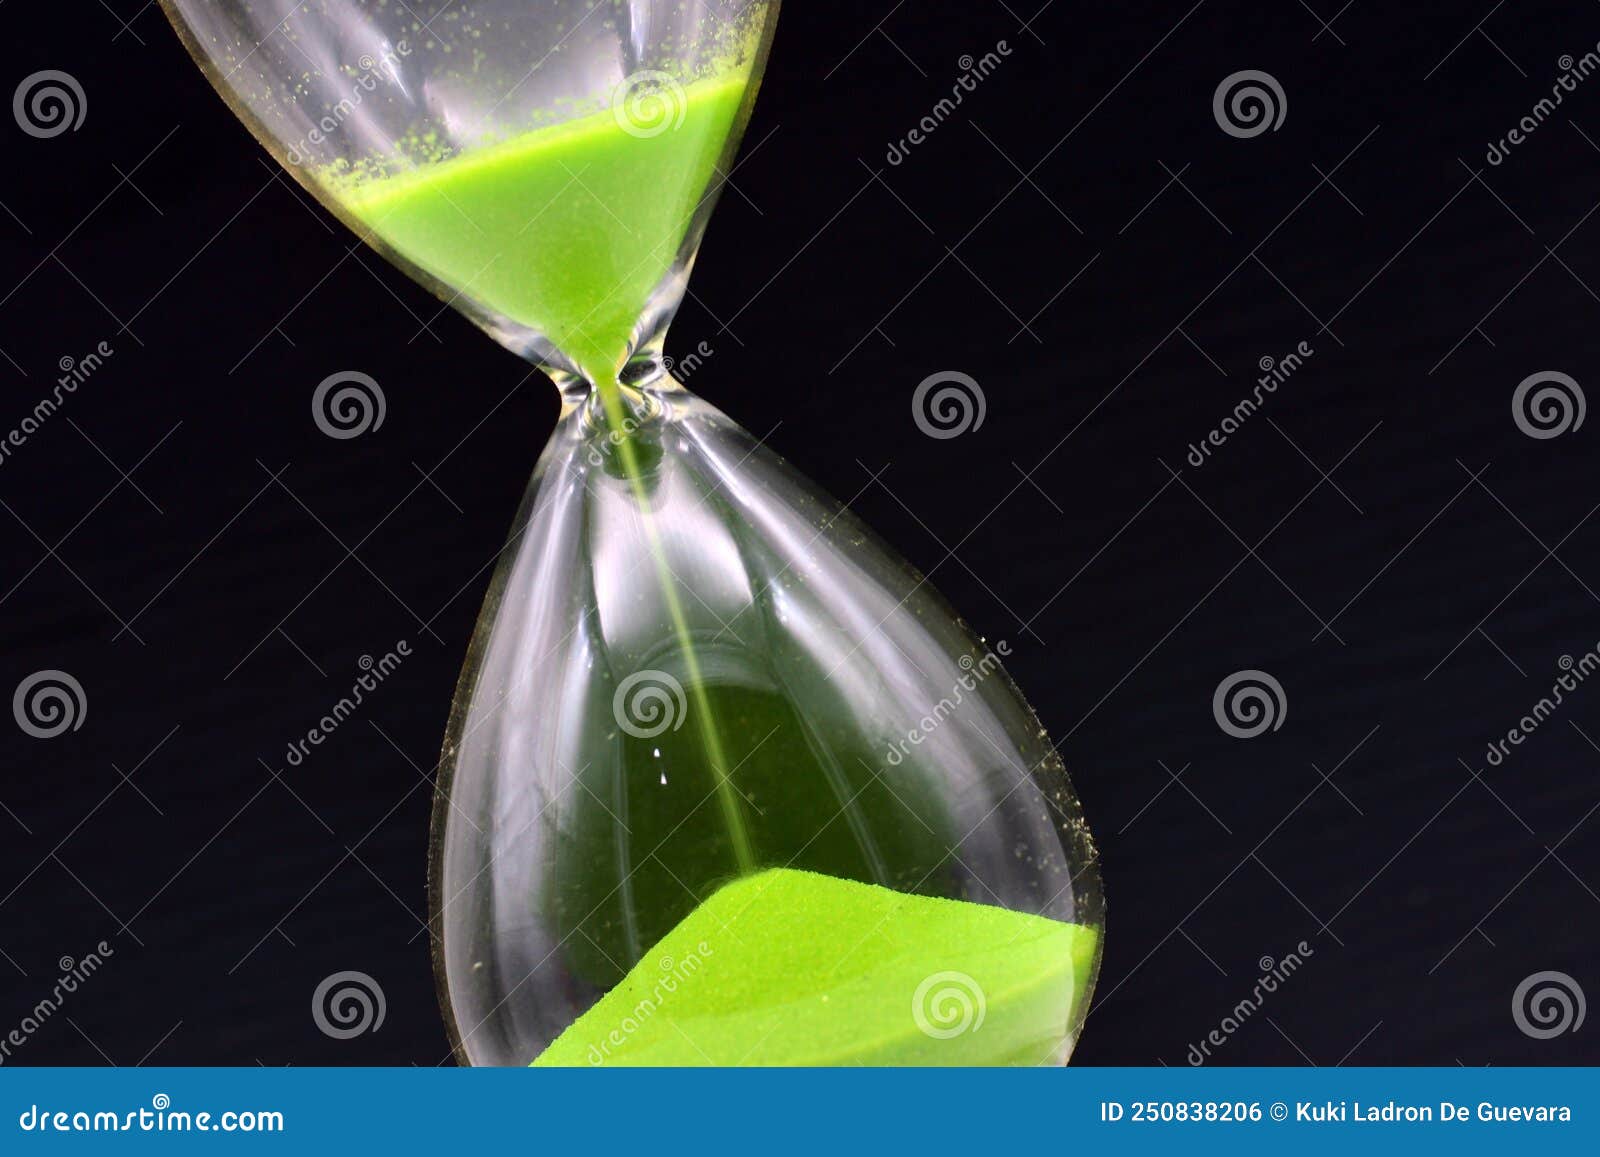 detail of a green hourglass telling the time